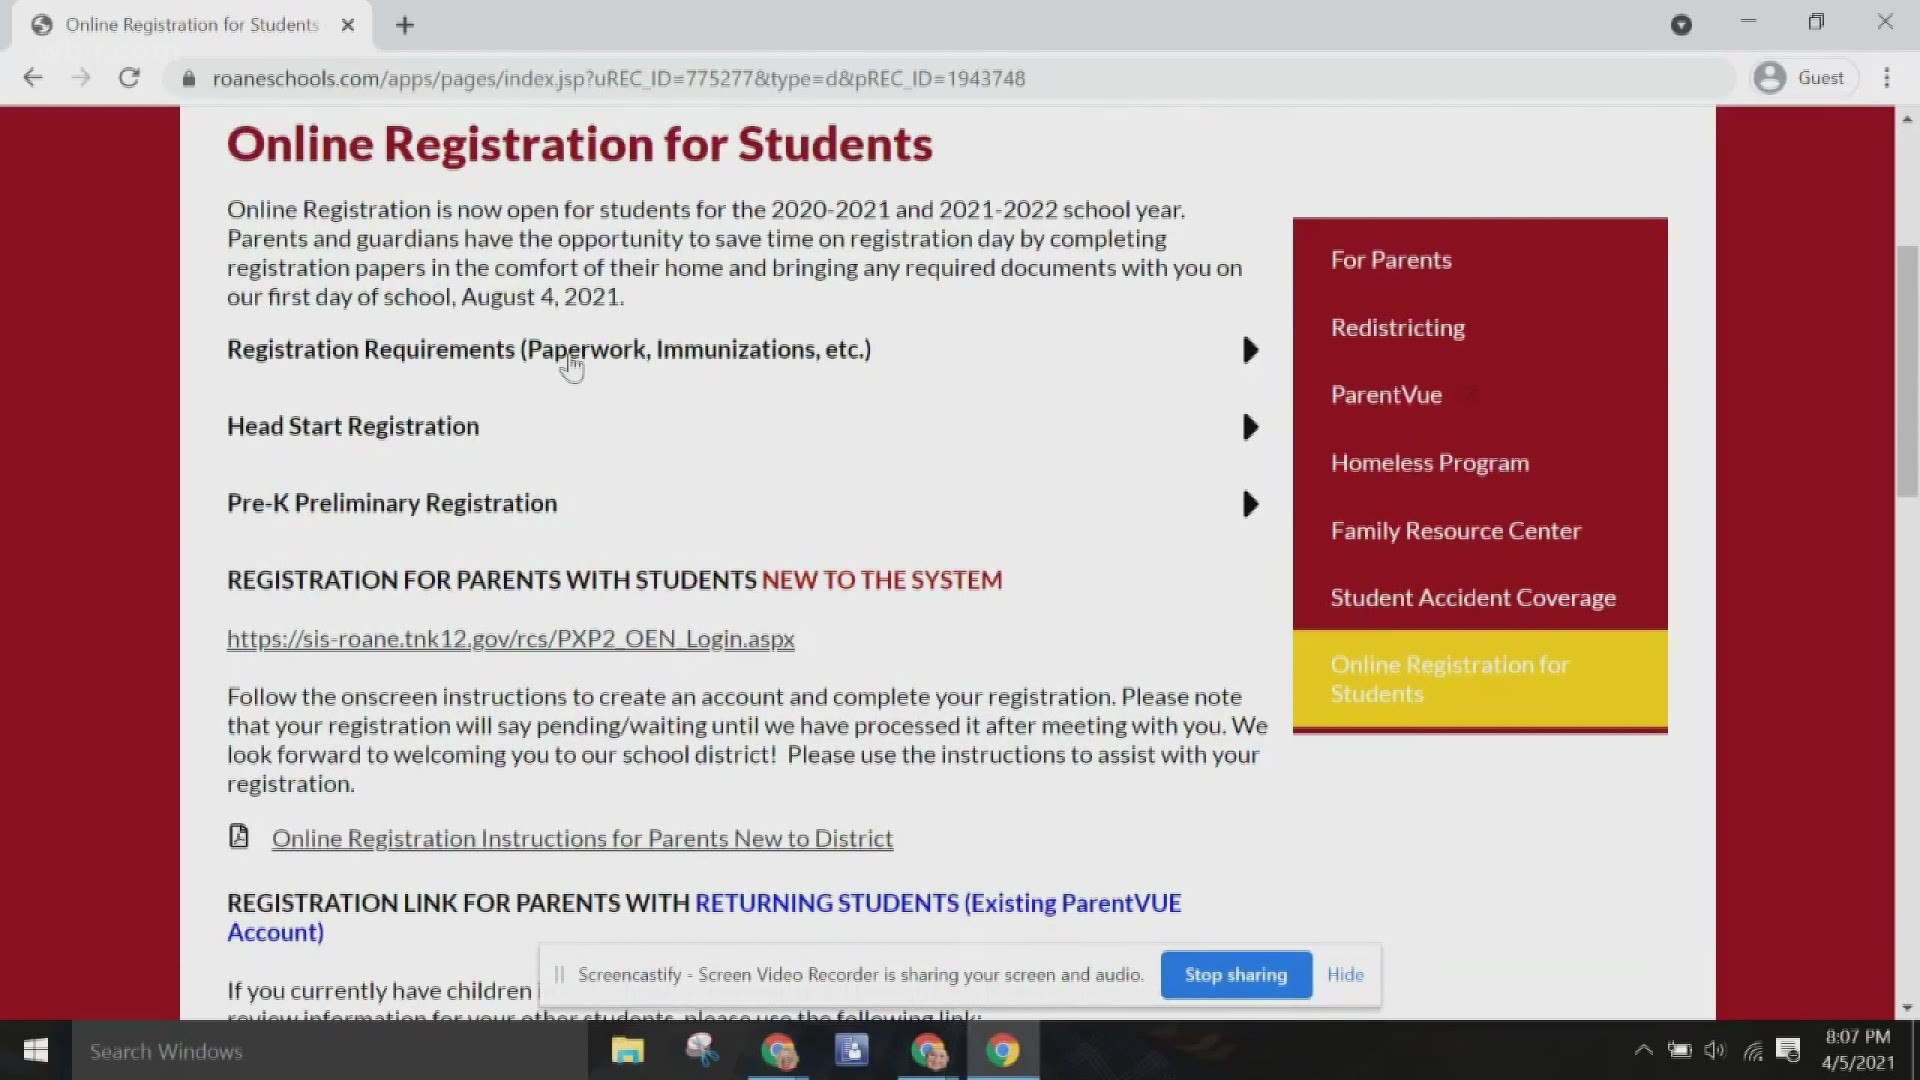 Roane County Schools has officially opened online registration for the 2021-2022 school year.